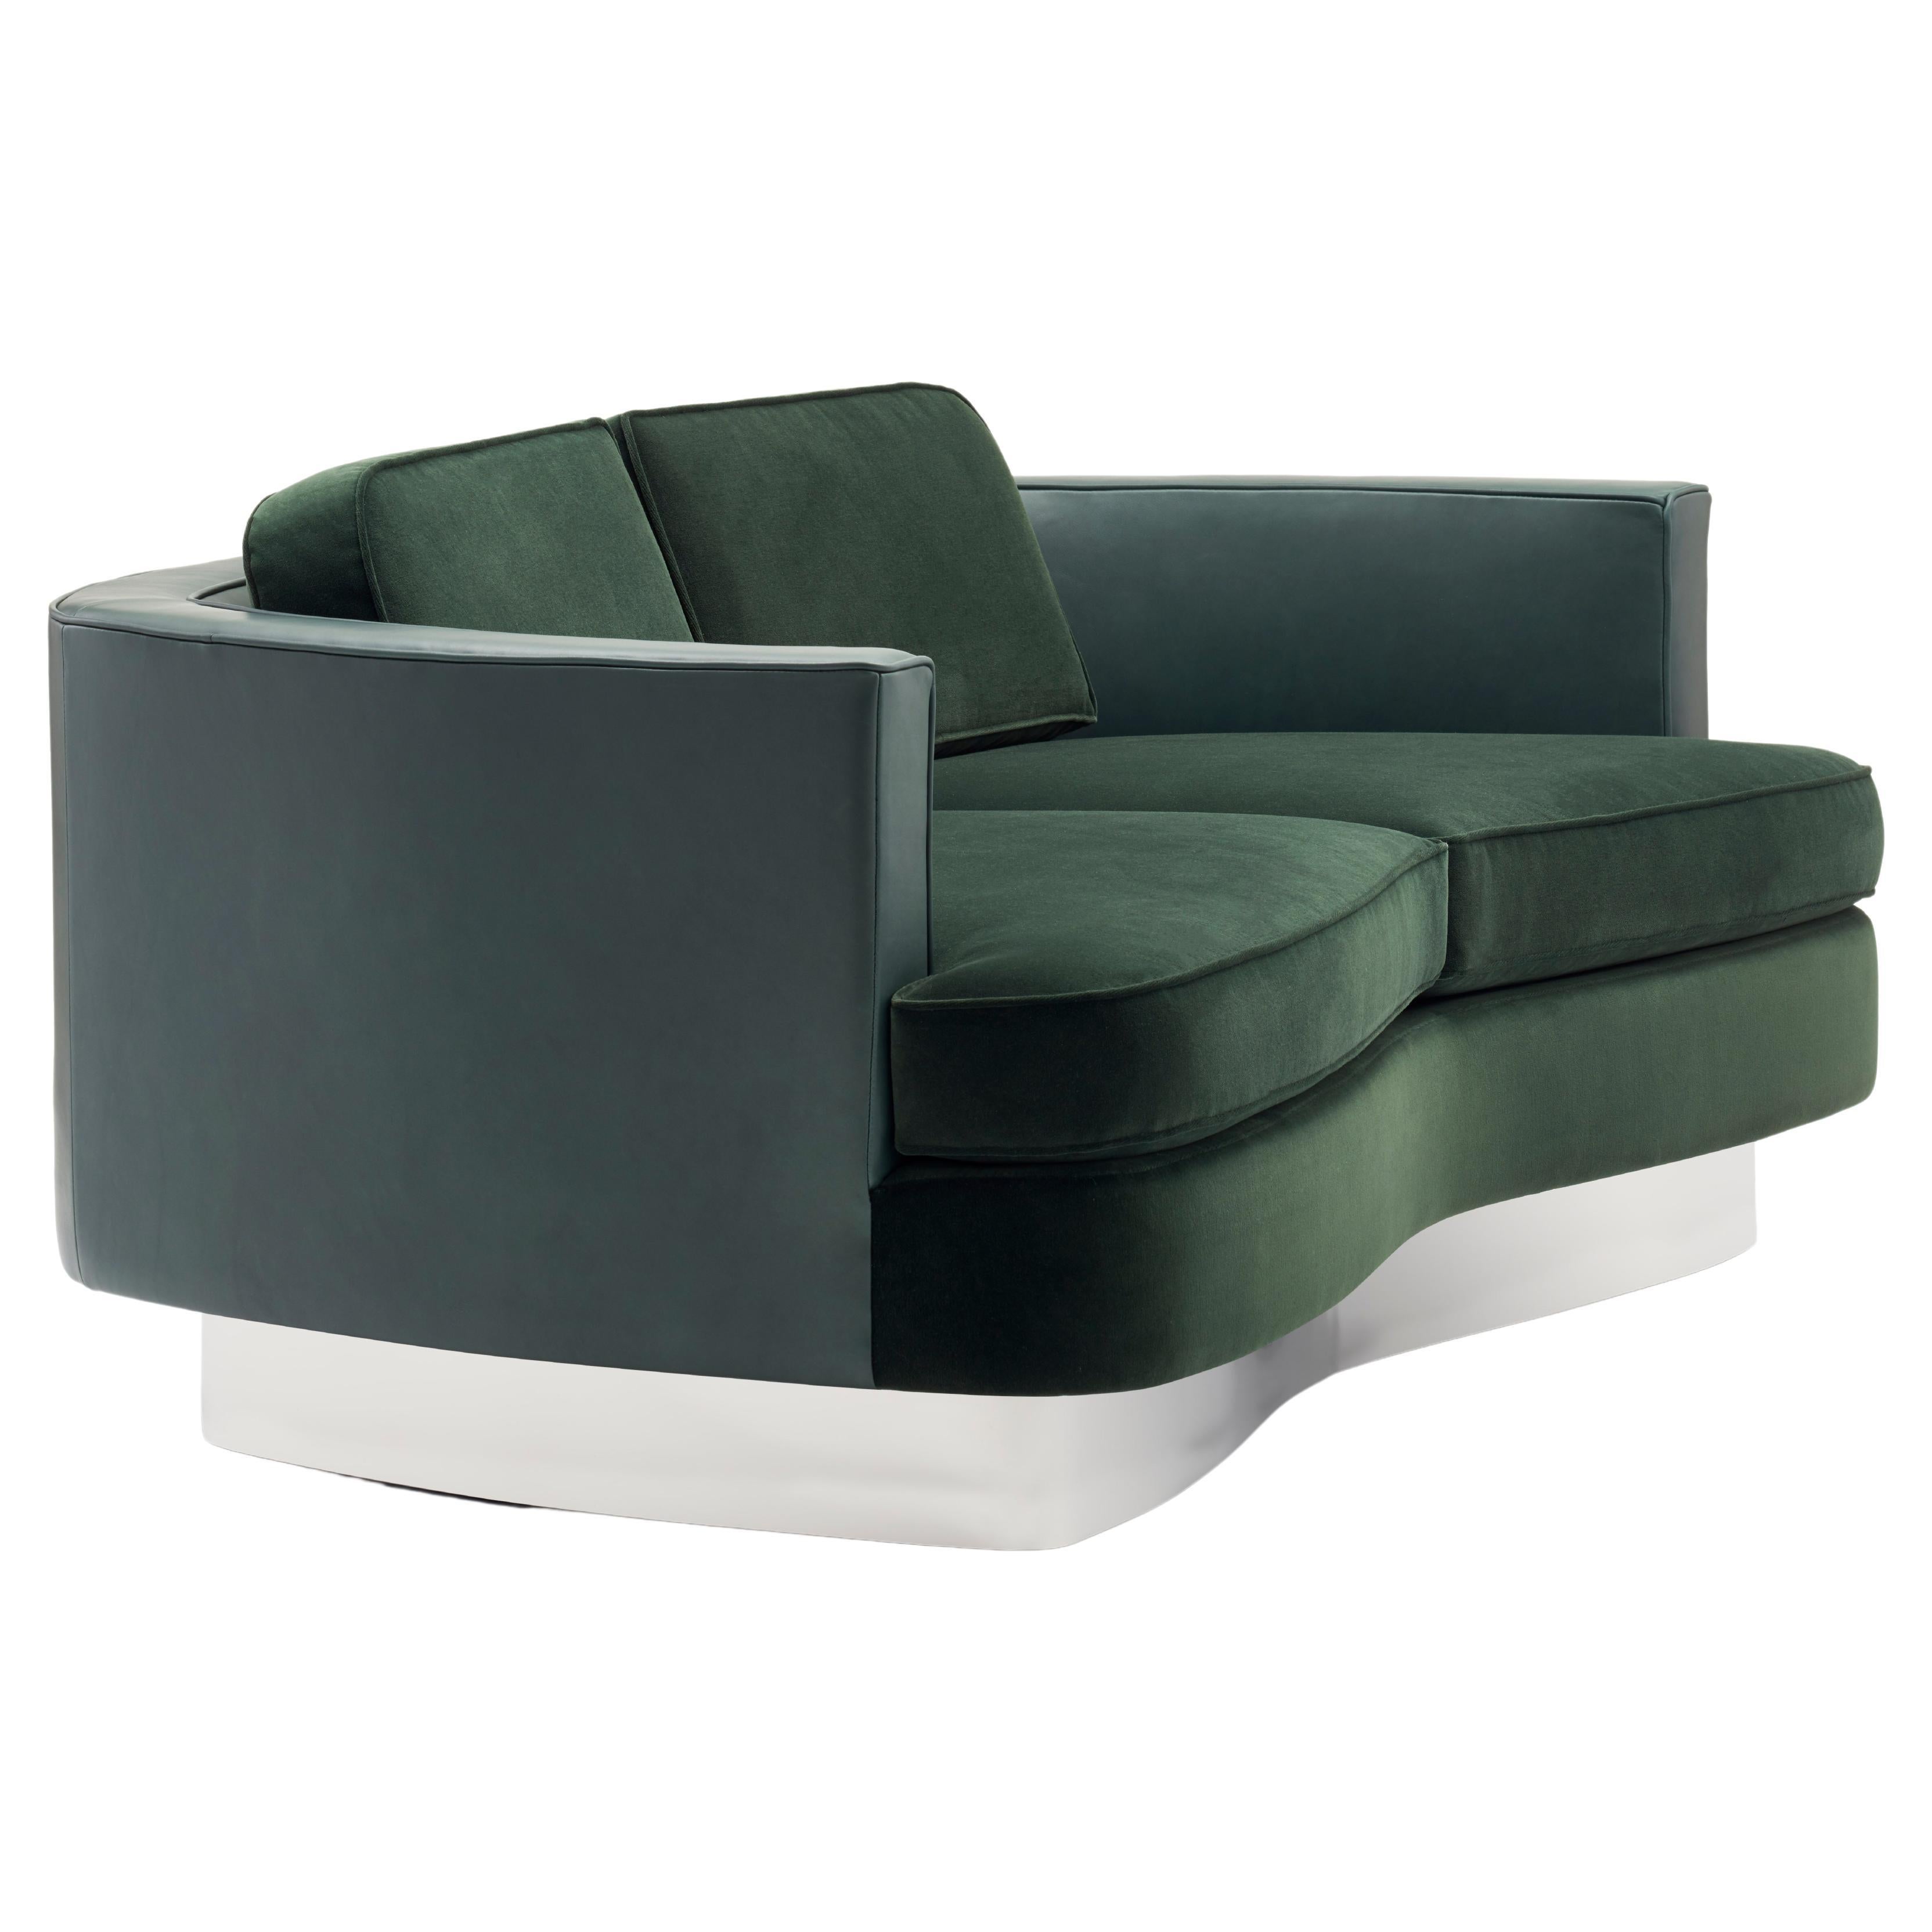 Cubist Curve Sofa 70", Upholstered Loveseat with Stainless Steel Base